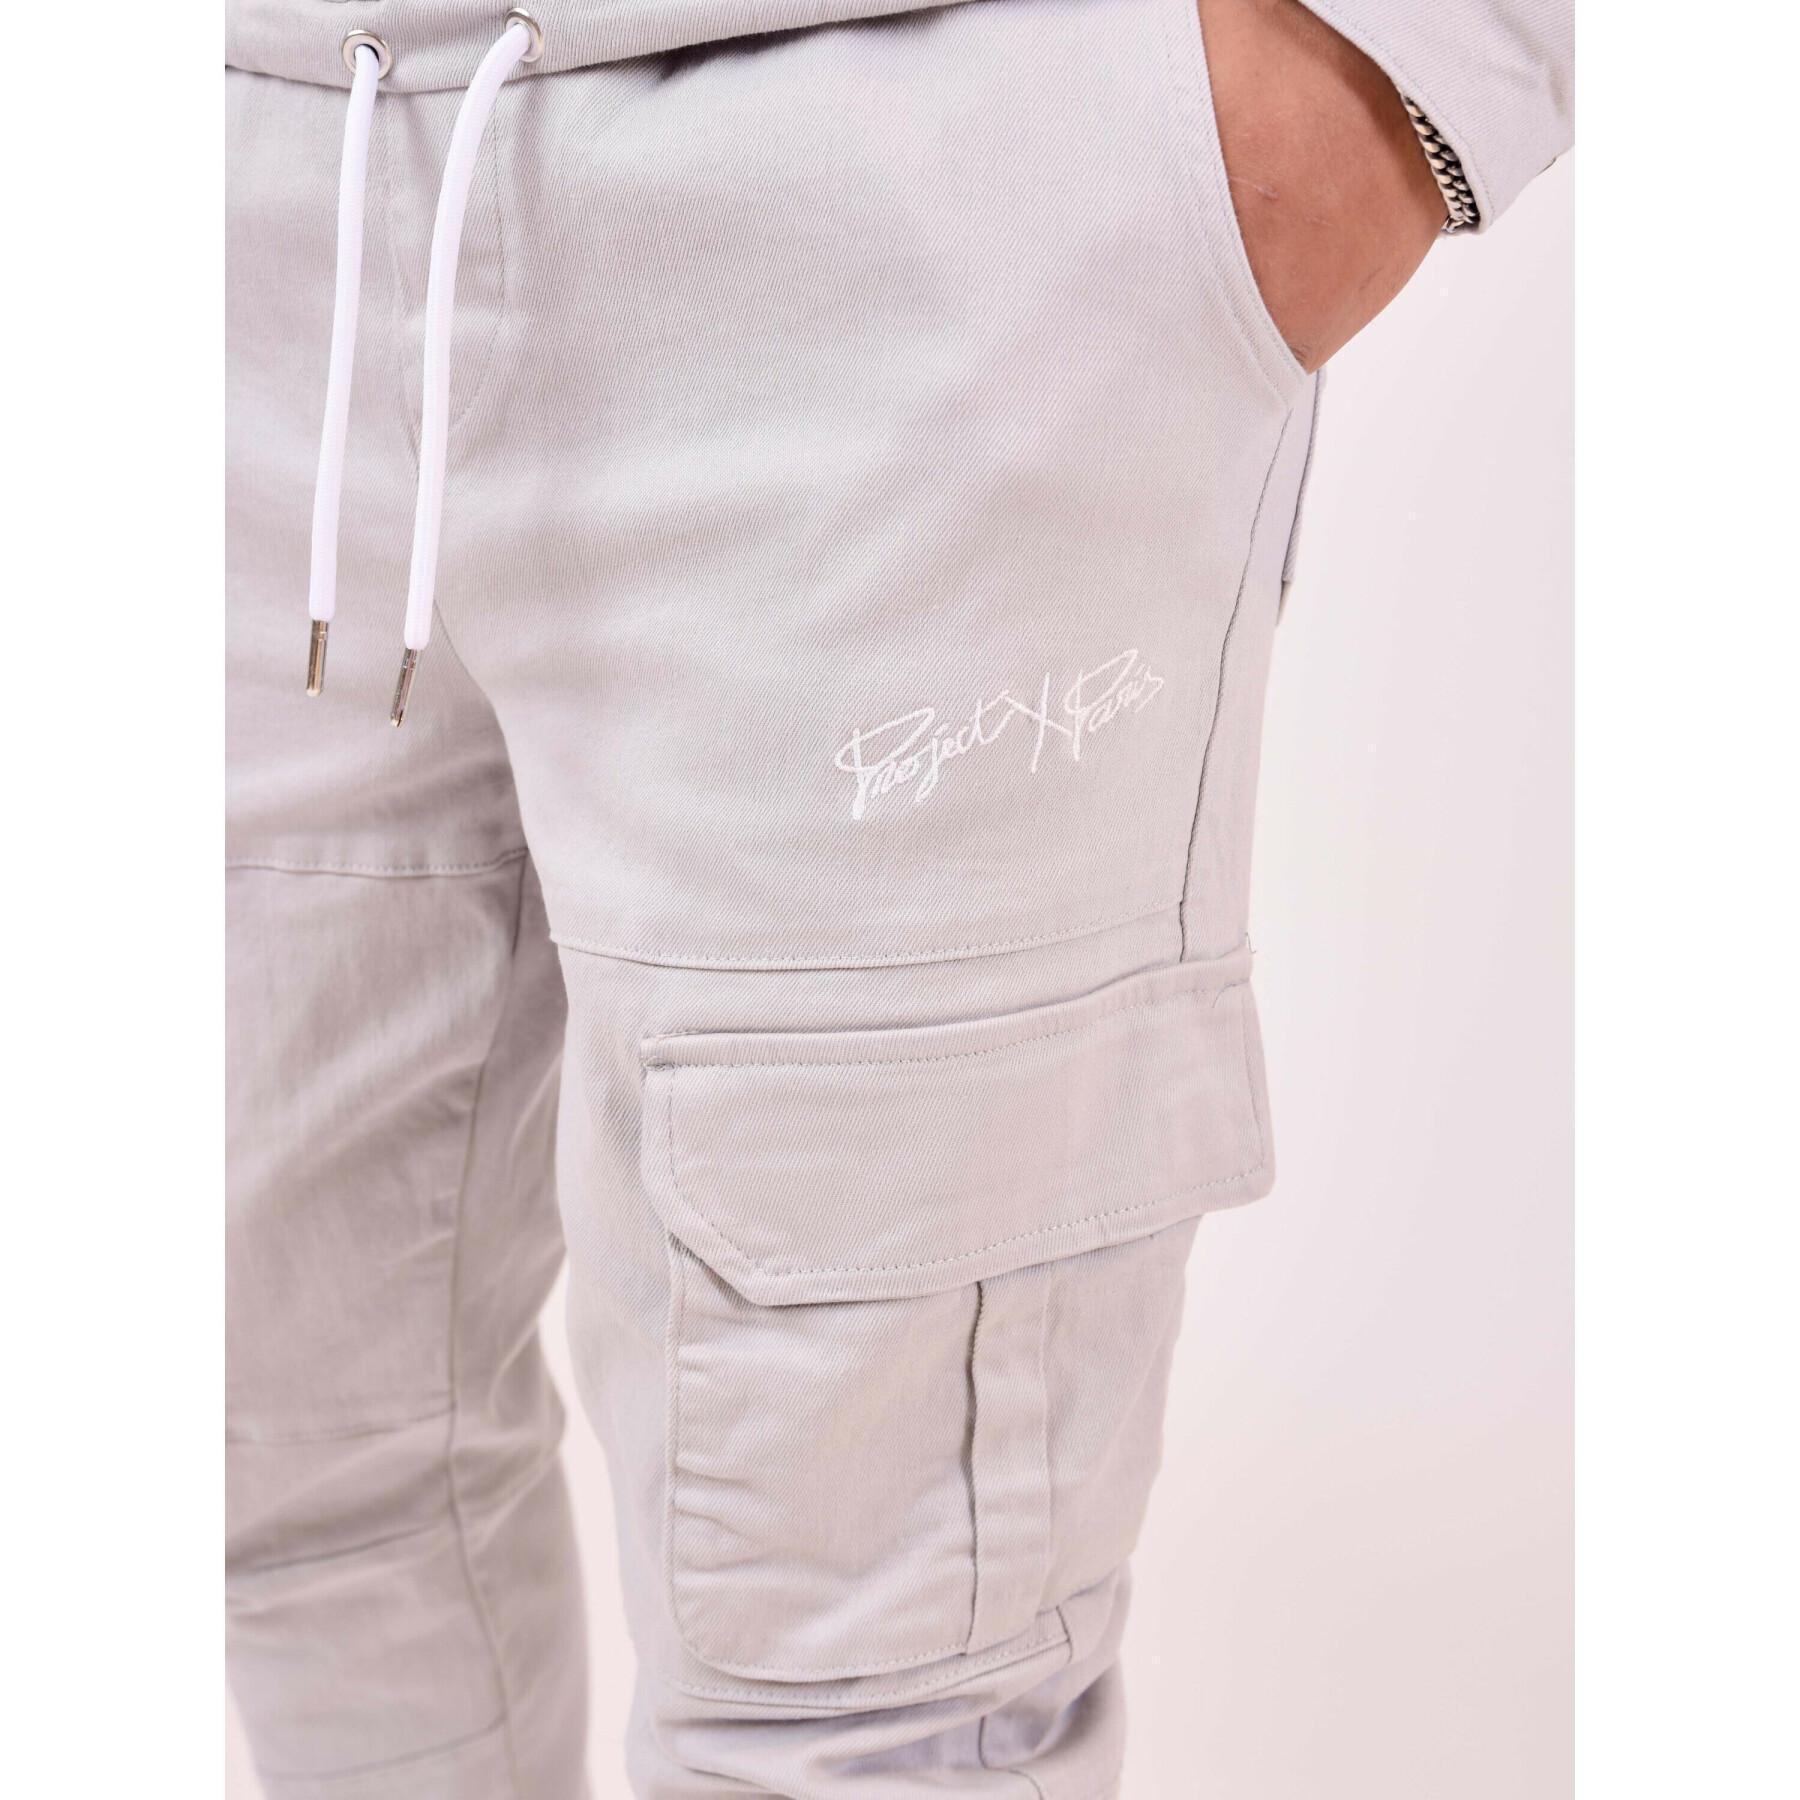 Jogging pockets with relief Project X Paris